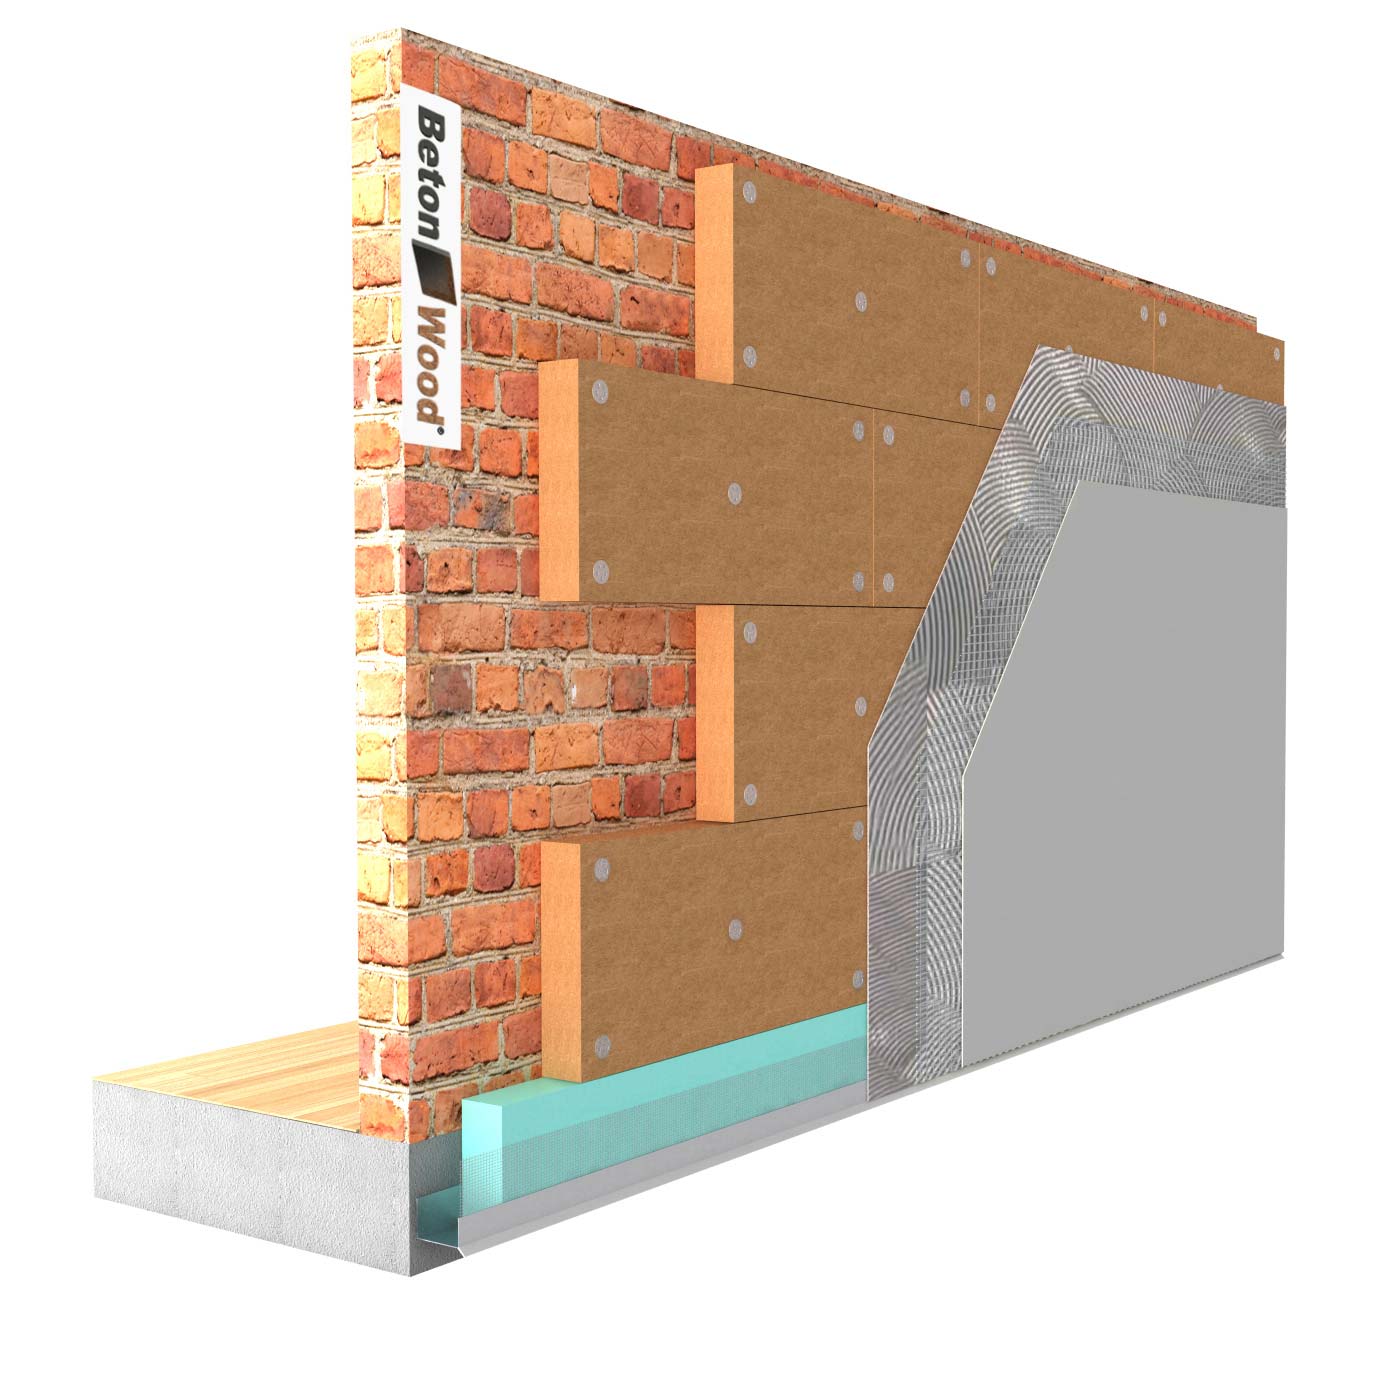 External thermal insulation system in Protect Wood fibre board